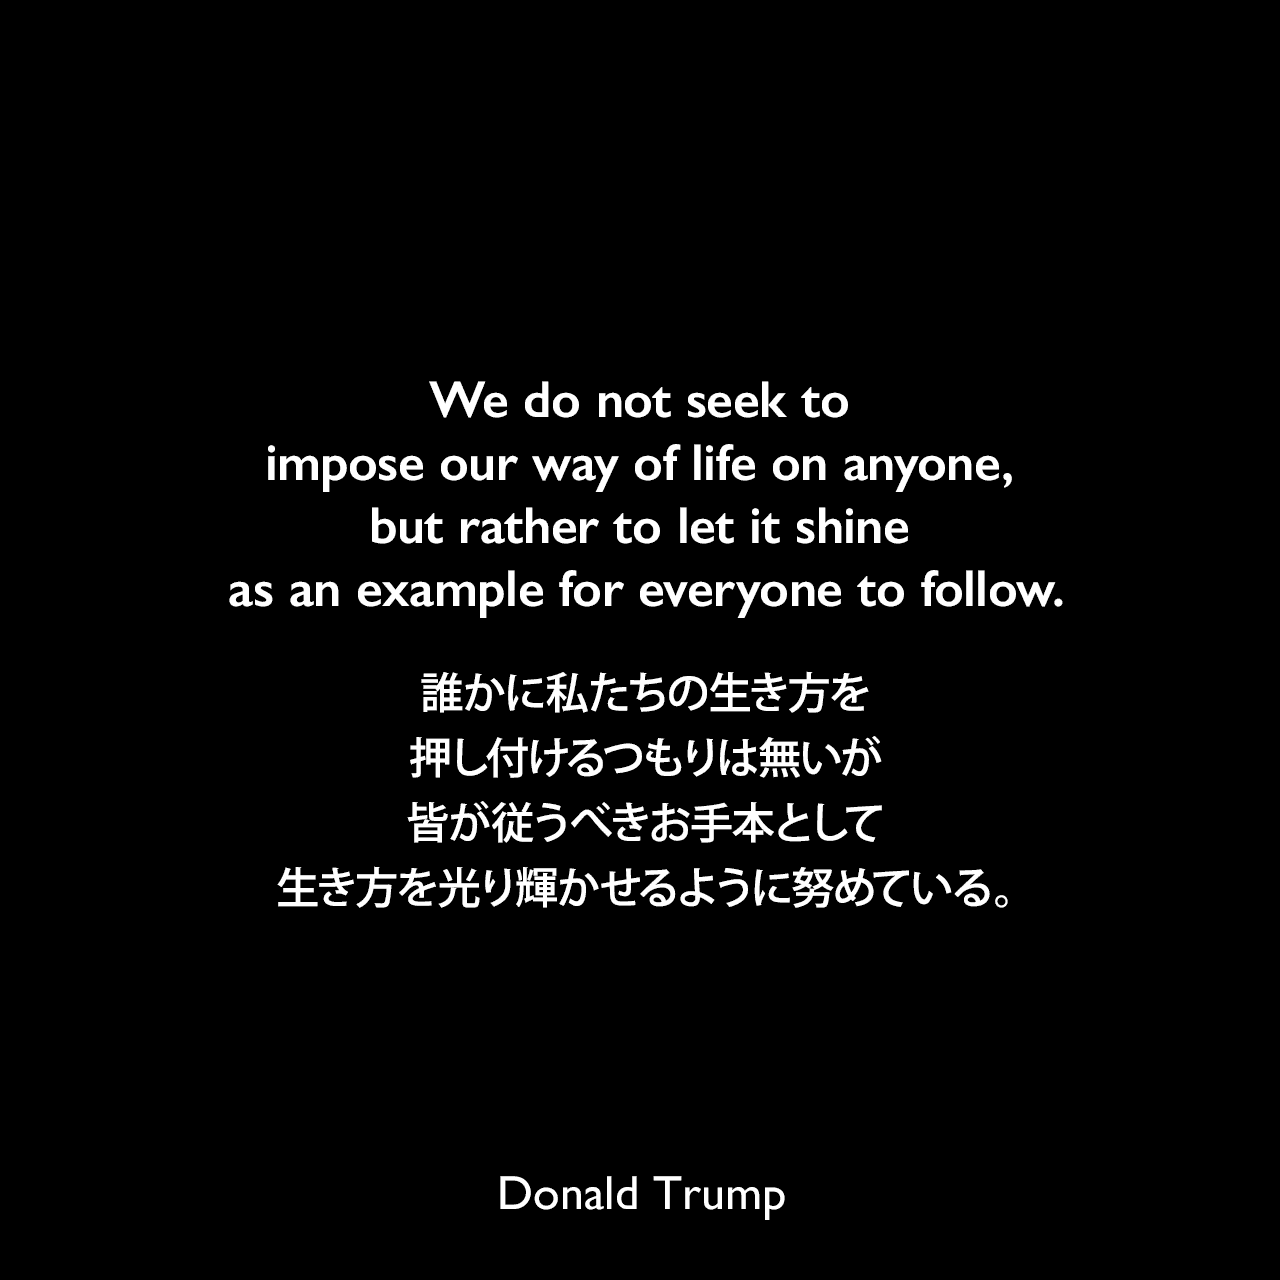 We do not seek to impose our way of life on anyone, but rather to let it shine as an example for everyone to follow.誰かに私たちの生き方を押し付けるつもりは無いが、皆が従うべきお手本として生き方を光り輝かせるように努めている。Donald Trump